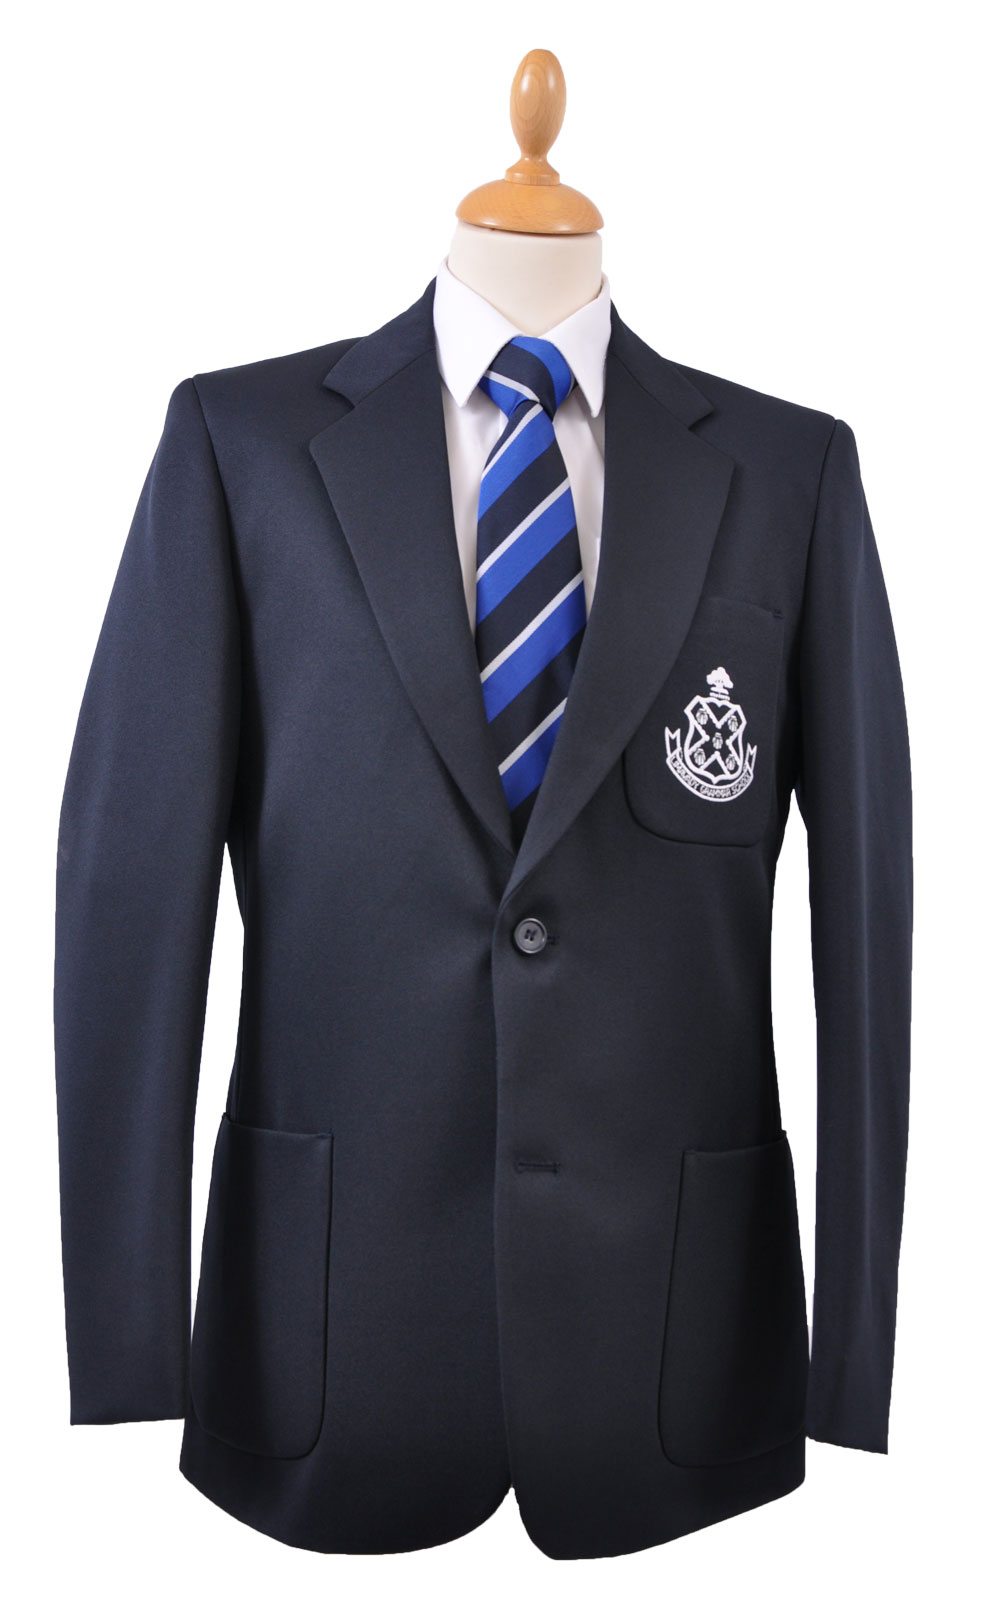 Picture of Limavady GS Boys Blazer - S&T